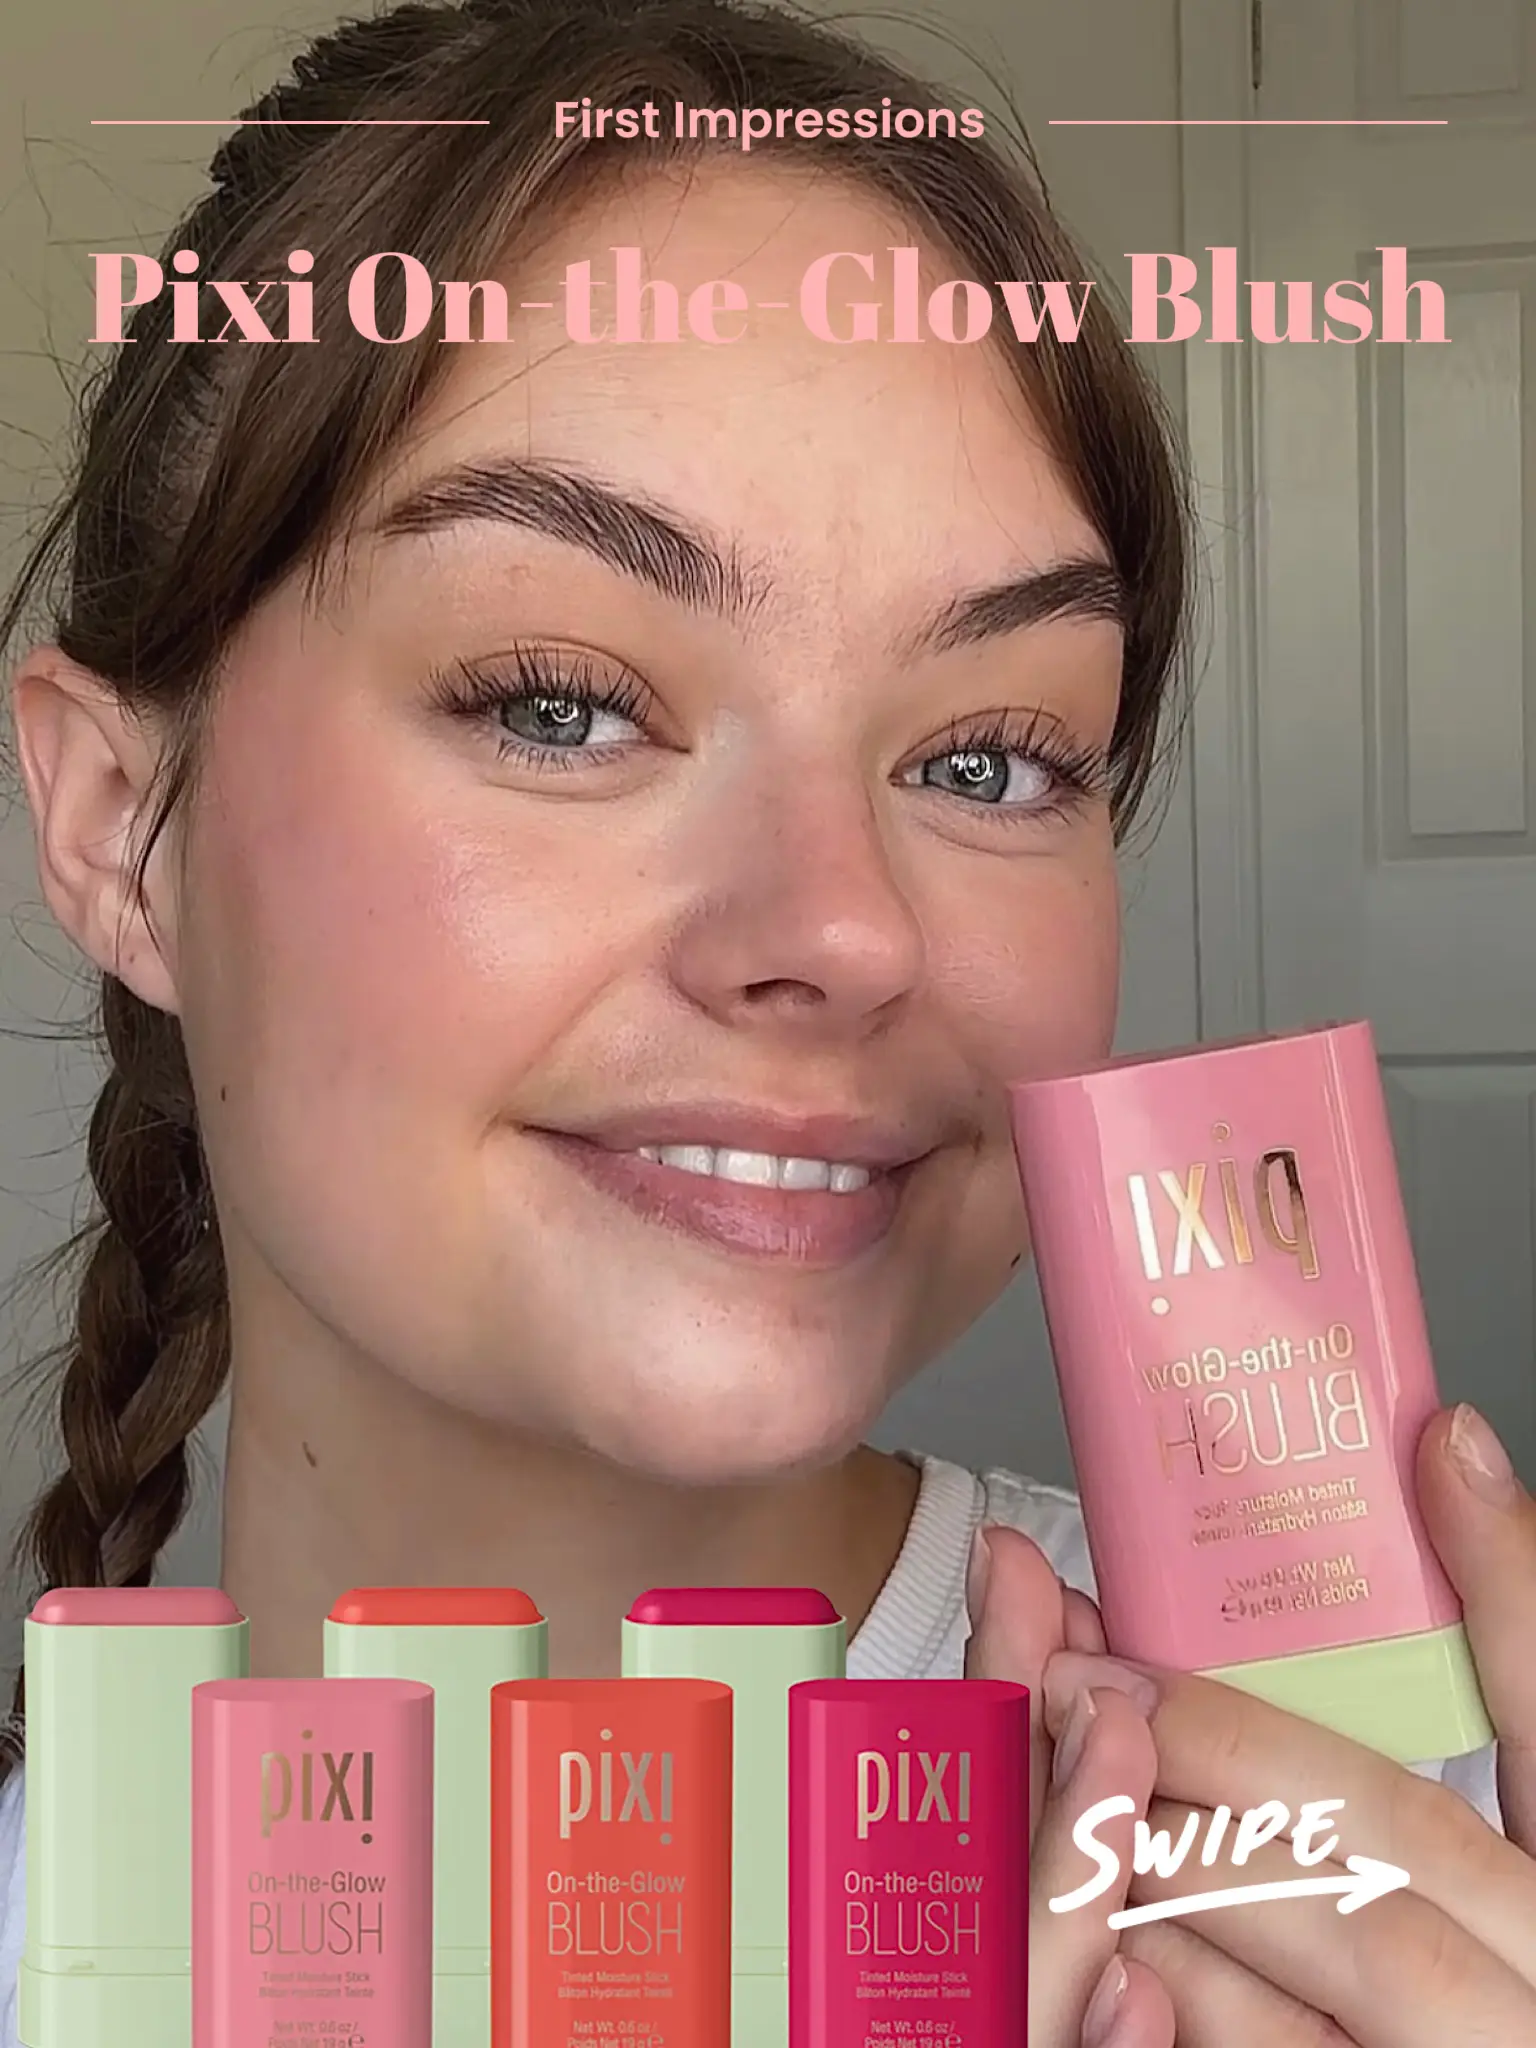 Pixi On-The-Glow Blush 🧚🏼‍♀️💓💐 | Gallery posted by Molly 🎨 💕 | Lemon8